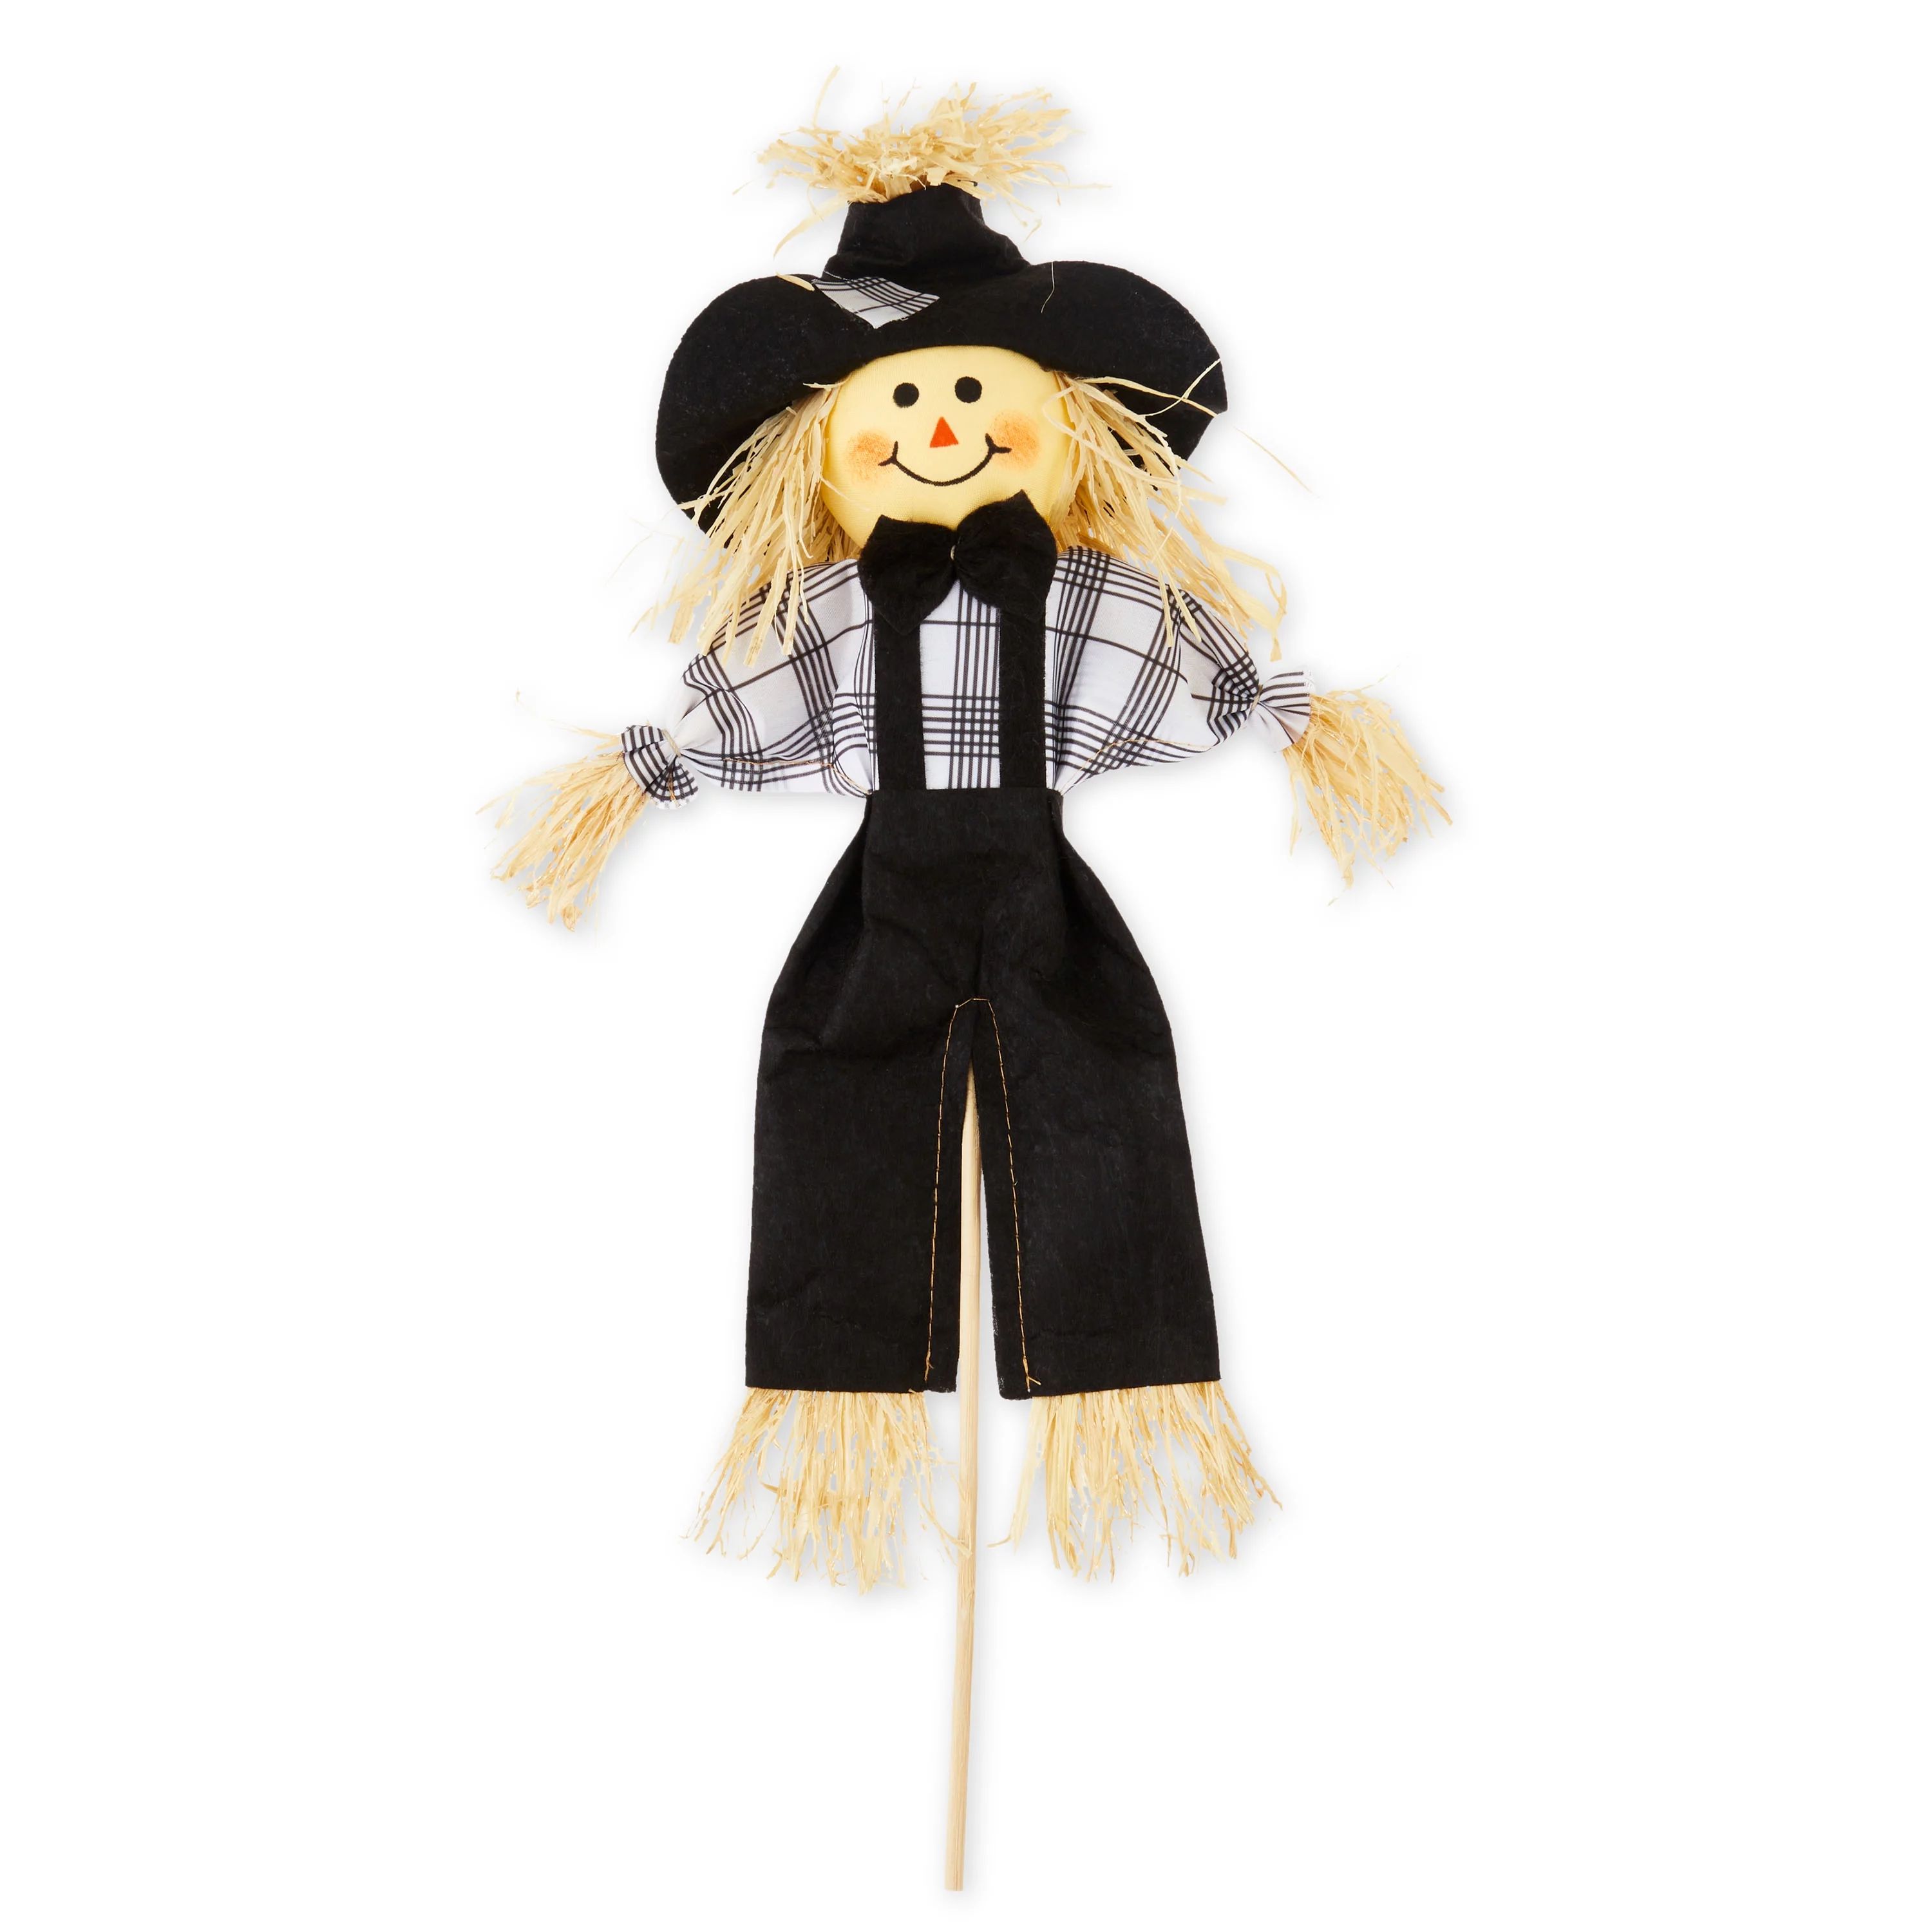 Harvest Scarecrow Pick Decoration, Black and White Plaid, 14 in, by Way To Celebrate | Walmart (US)